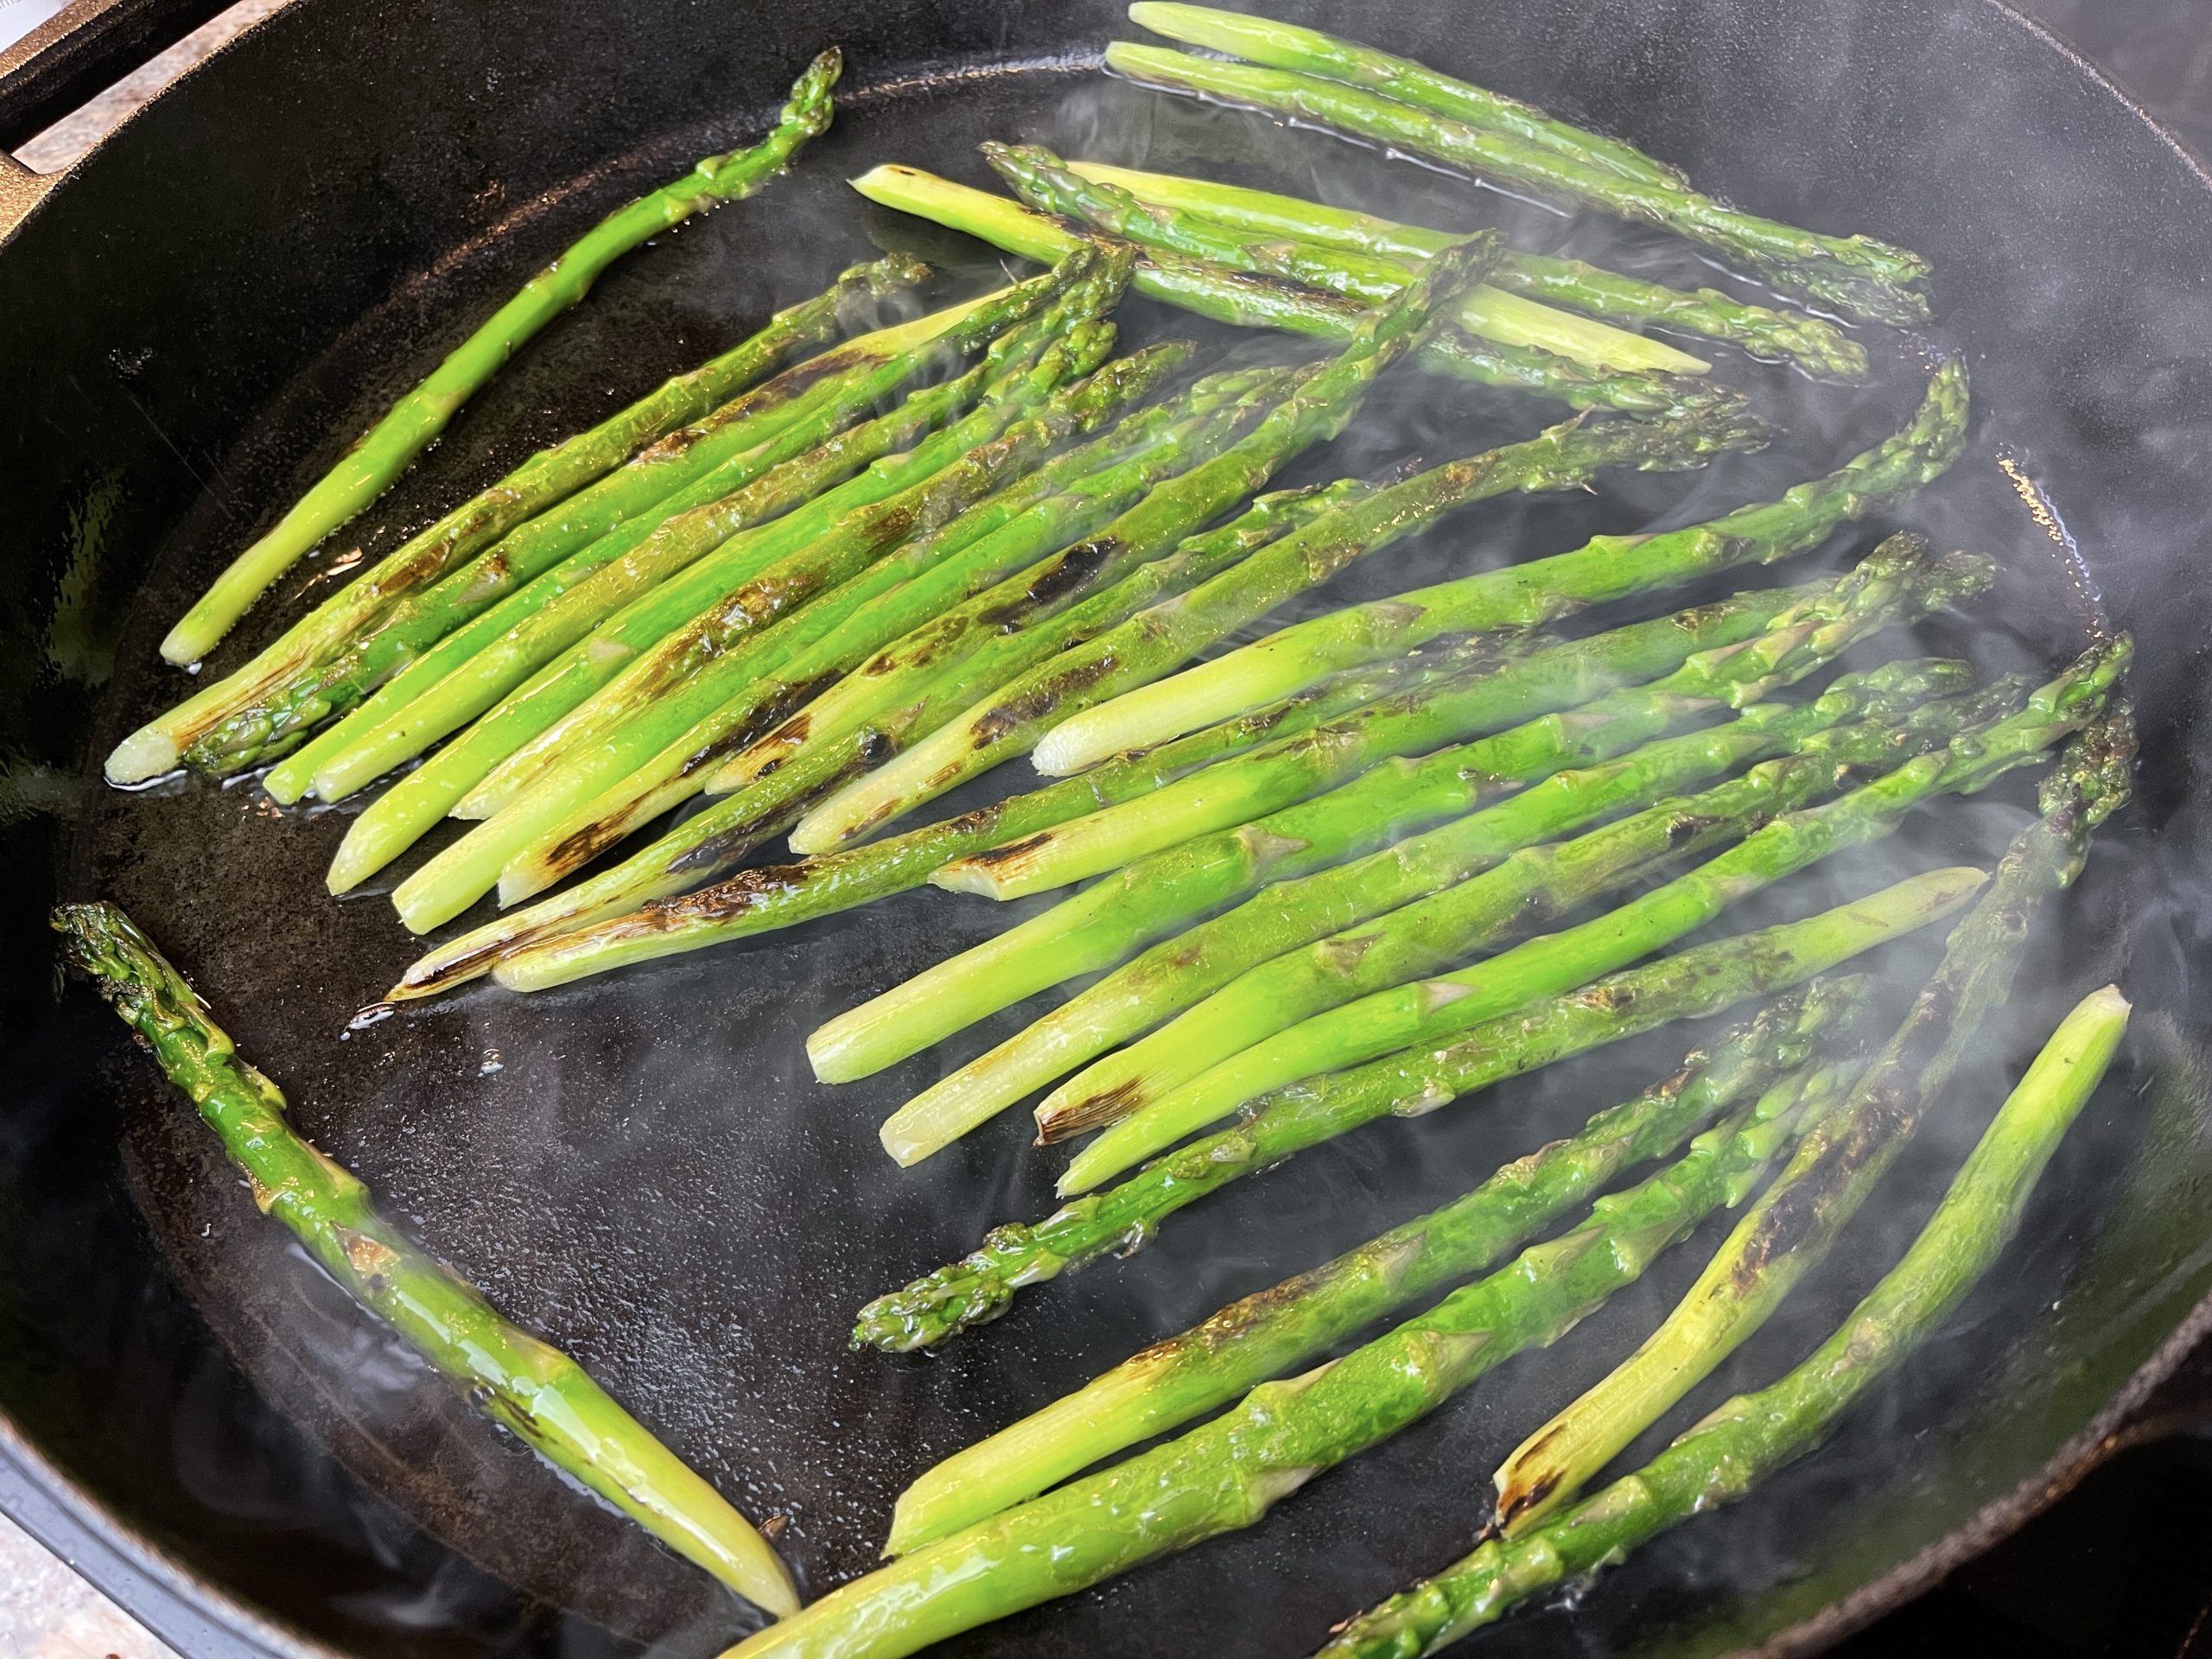 Use tongs to turn asparagus and cook an additional 3 minutes until asparagus are crisp-tender and charred in spots, about 5 minutes total. Sprinkle asparagus with black pepper, red pepper flakes, and season with salt. Transfer asparagus to a platter.